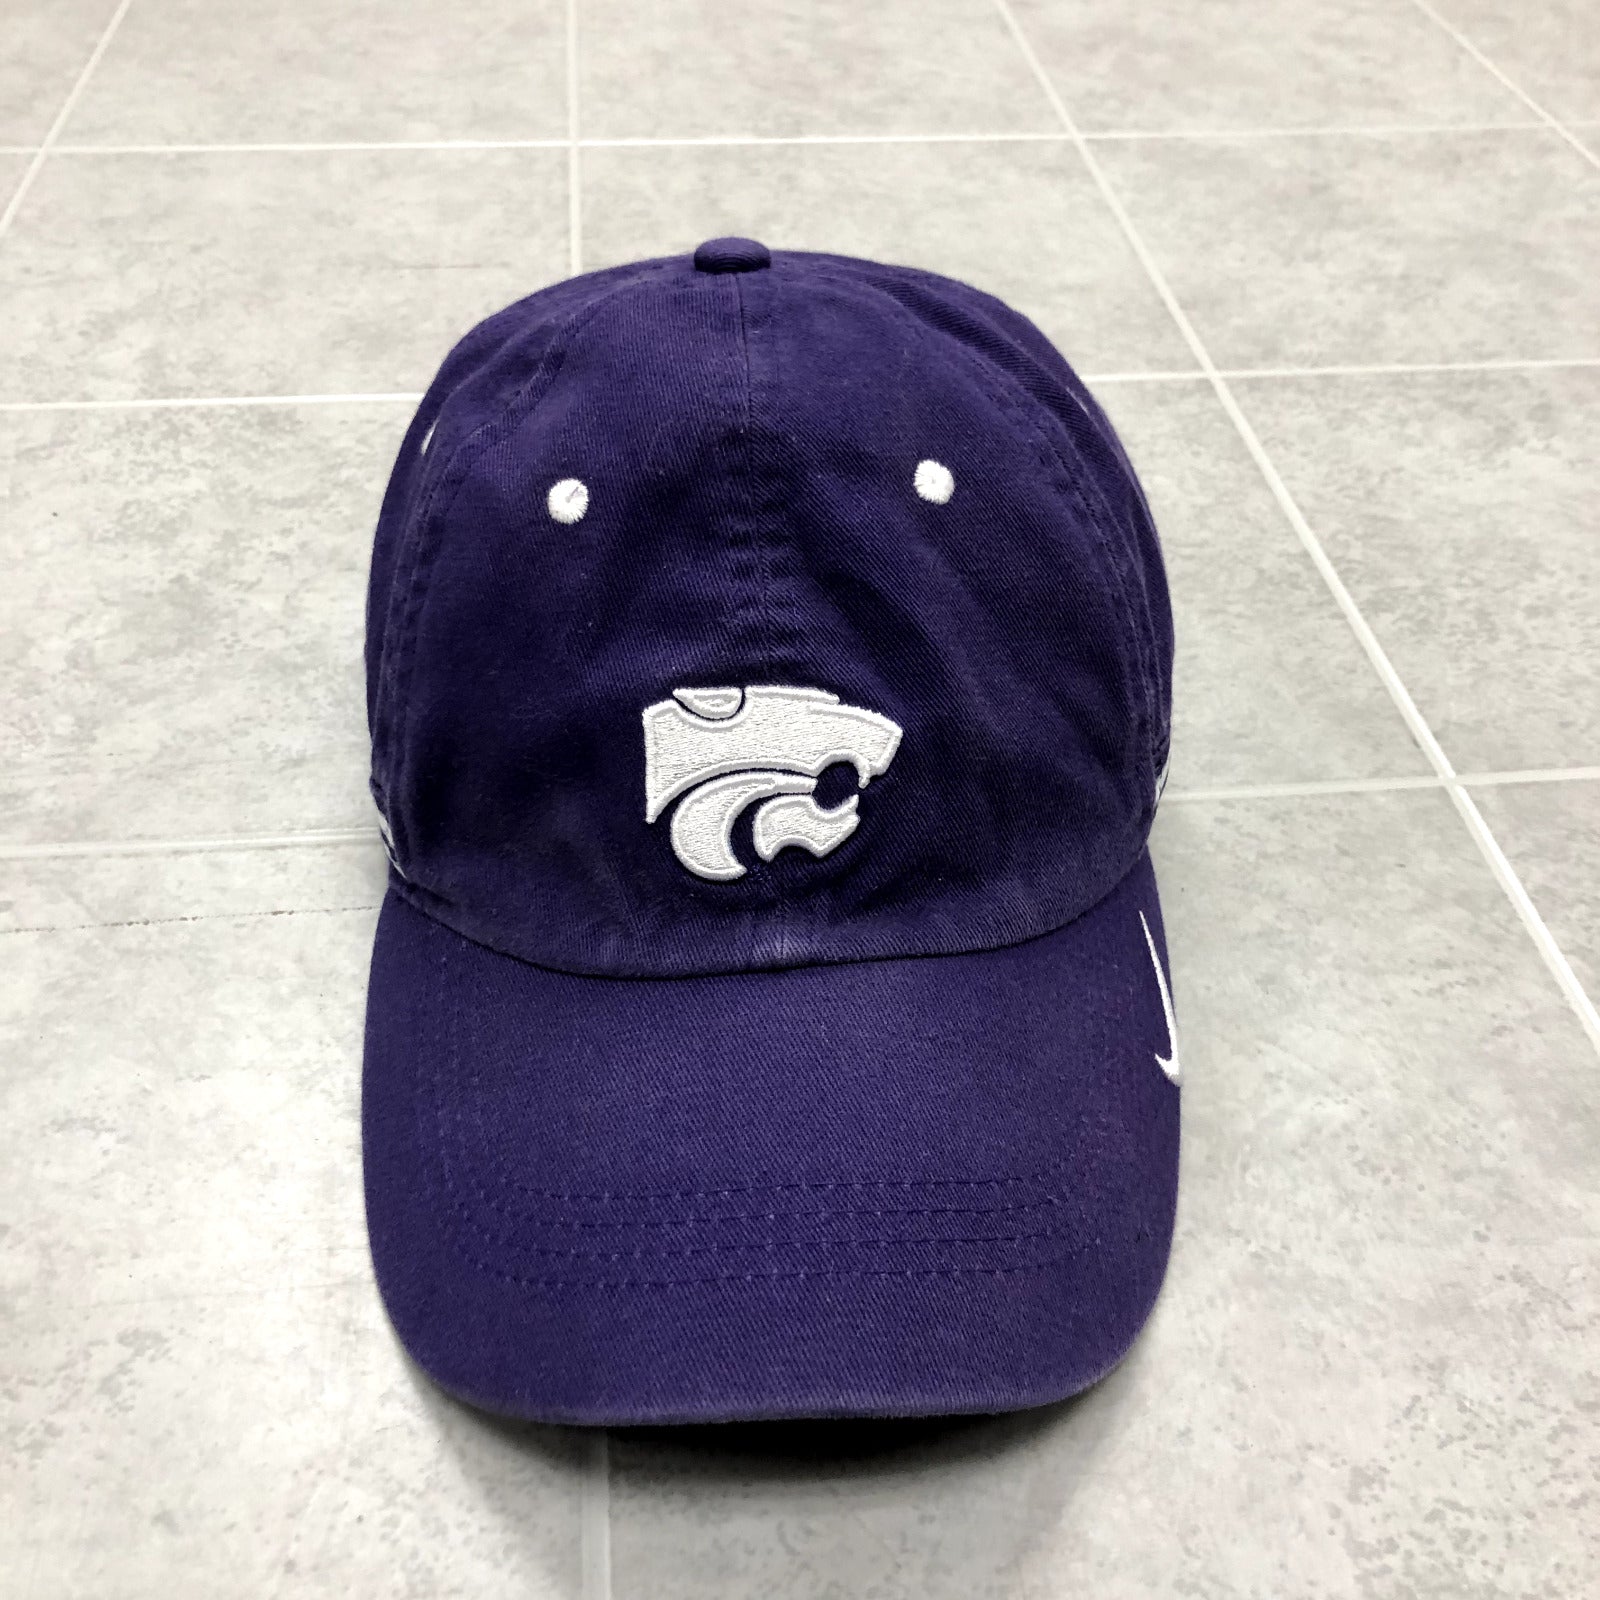 Nike Purple Cloth Strap Back Graphic K-State Baseball Cap Adult One Size